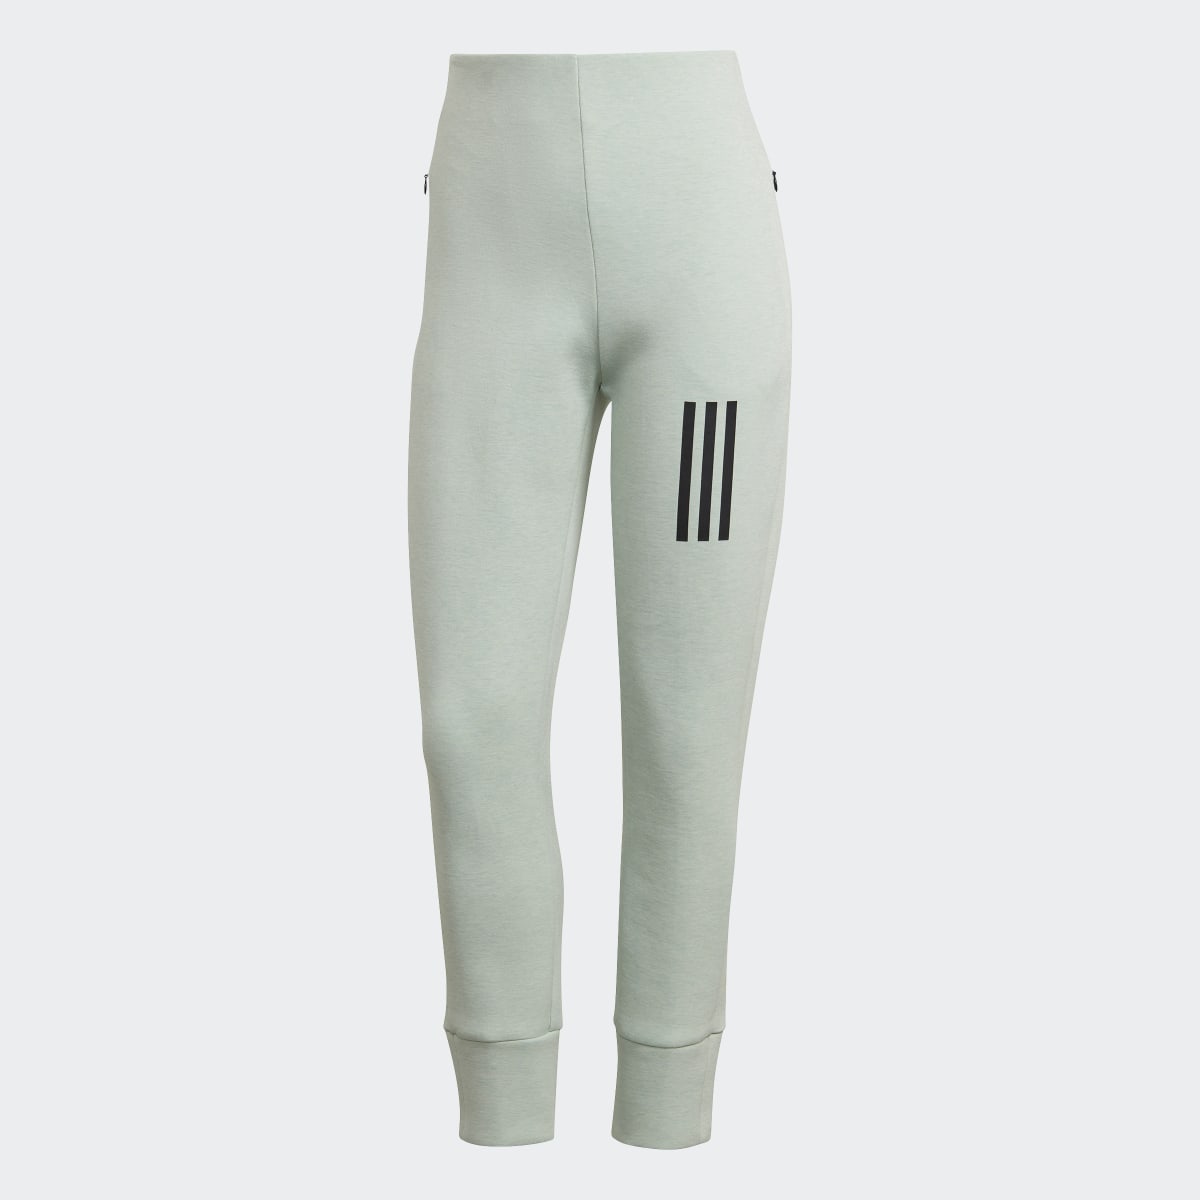 Adidas Mission Victory Slim-Fit High-Waist Tracksuit Bottoms. 4